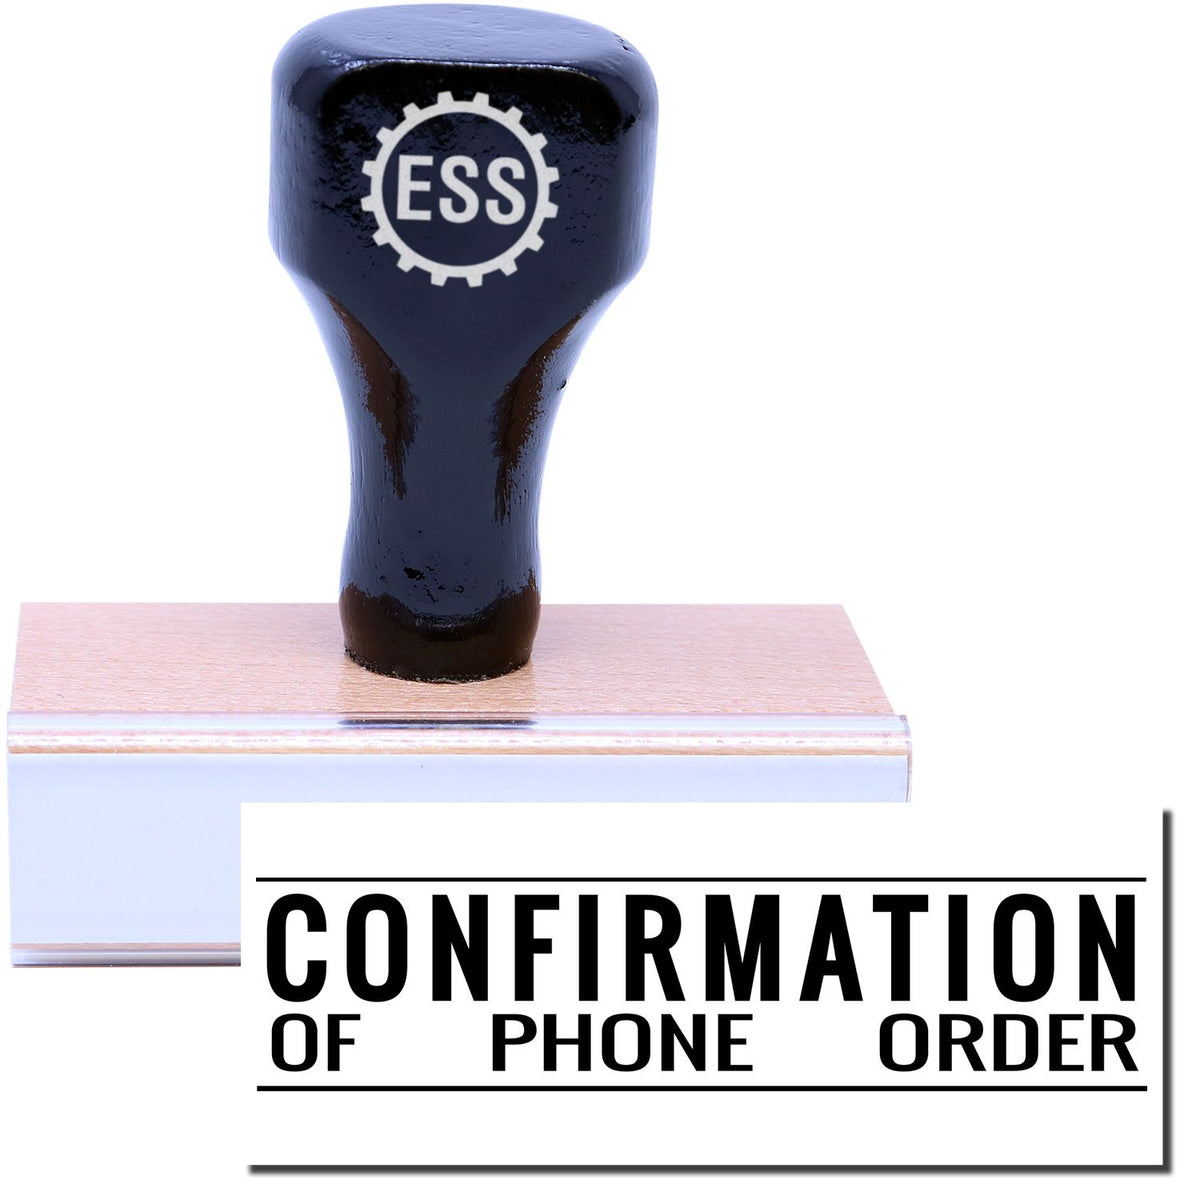 A stock office rubber stamp with a stamped image showing how the text &quot;CONFIRMATION OF PHONE ORDER&quot; in a large font with a line both above and below the text is displayed after stamping.